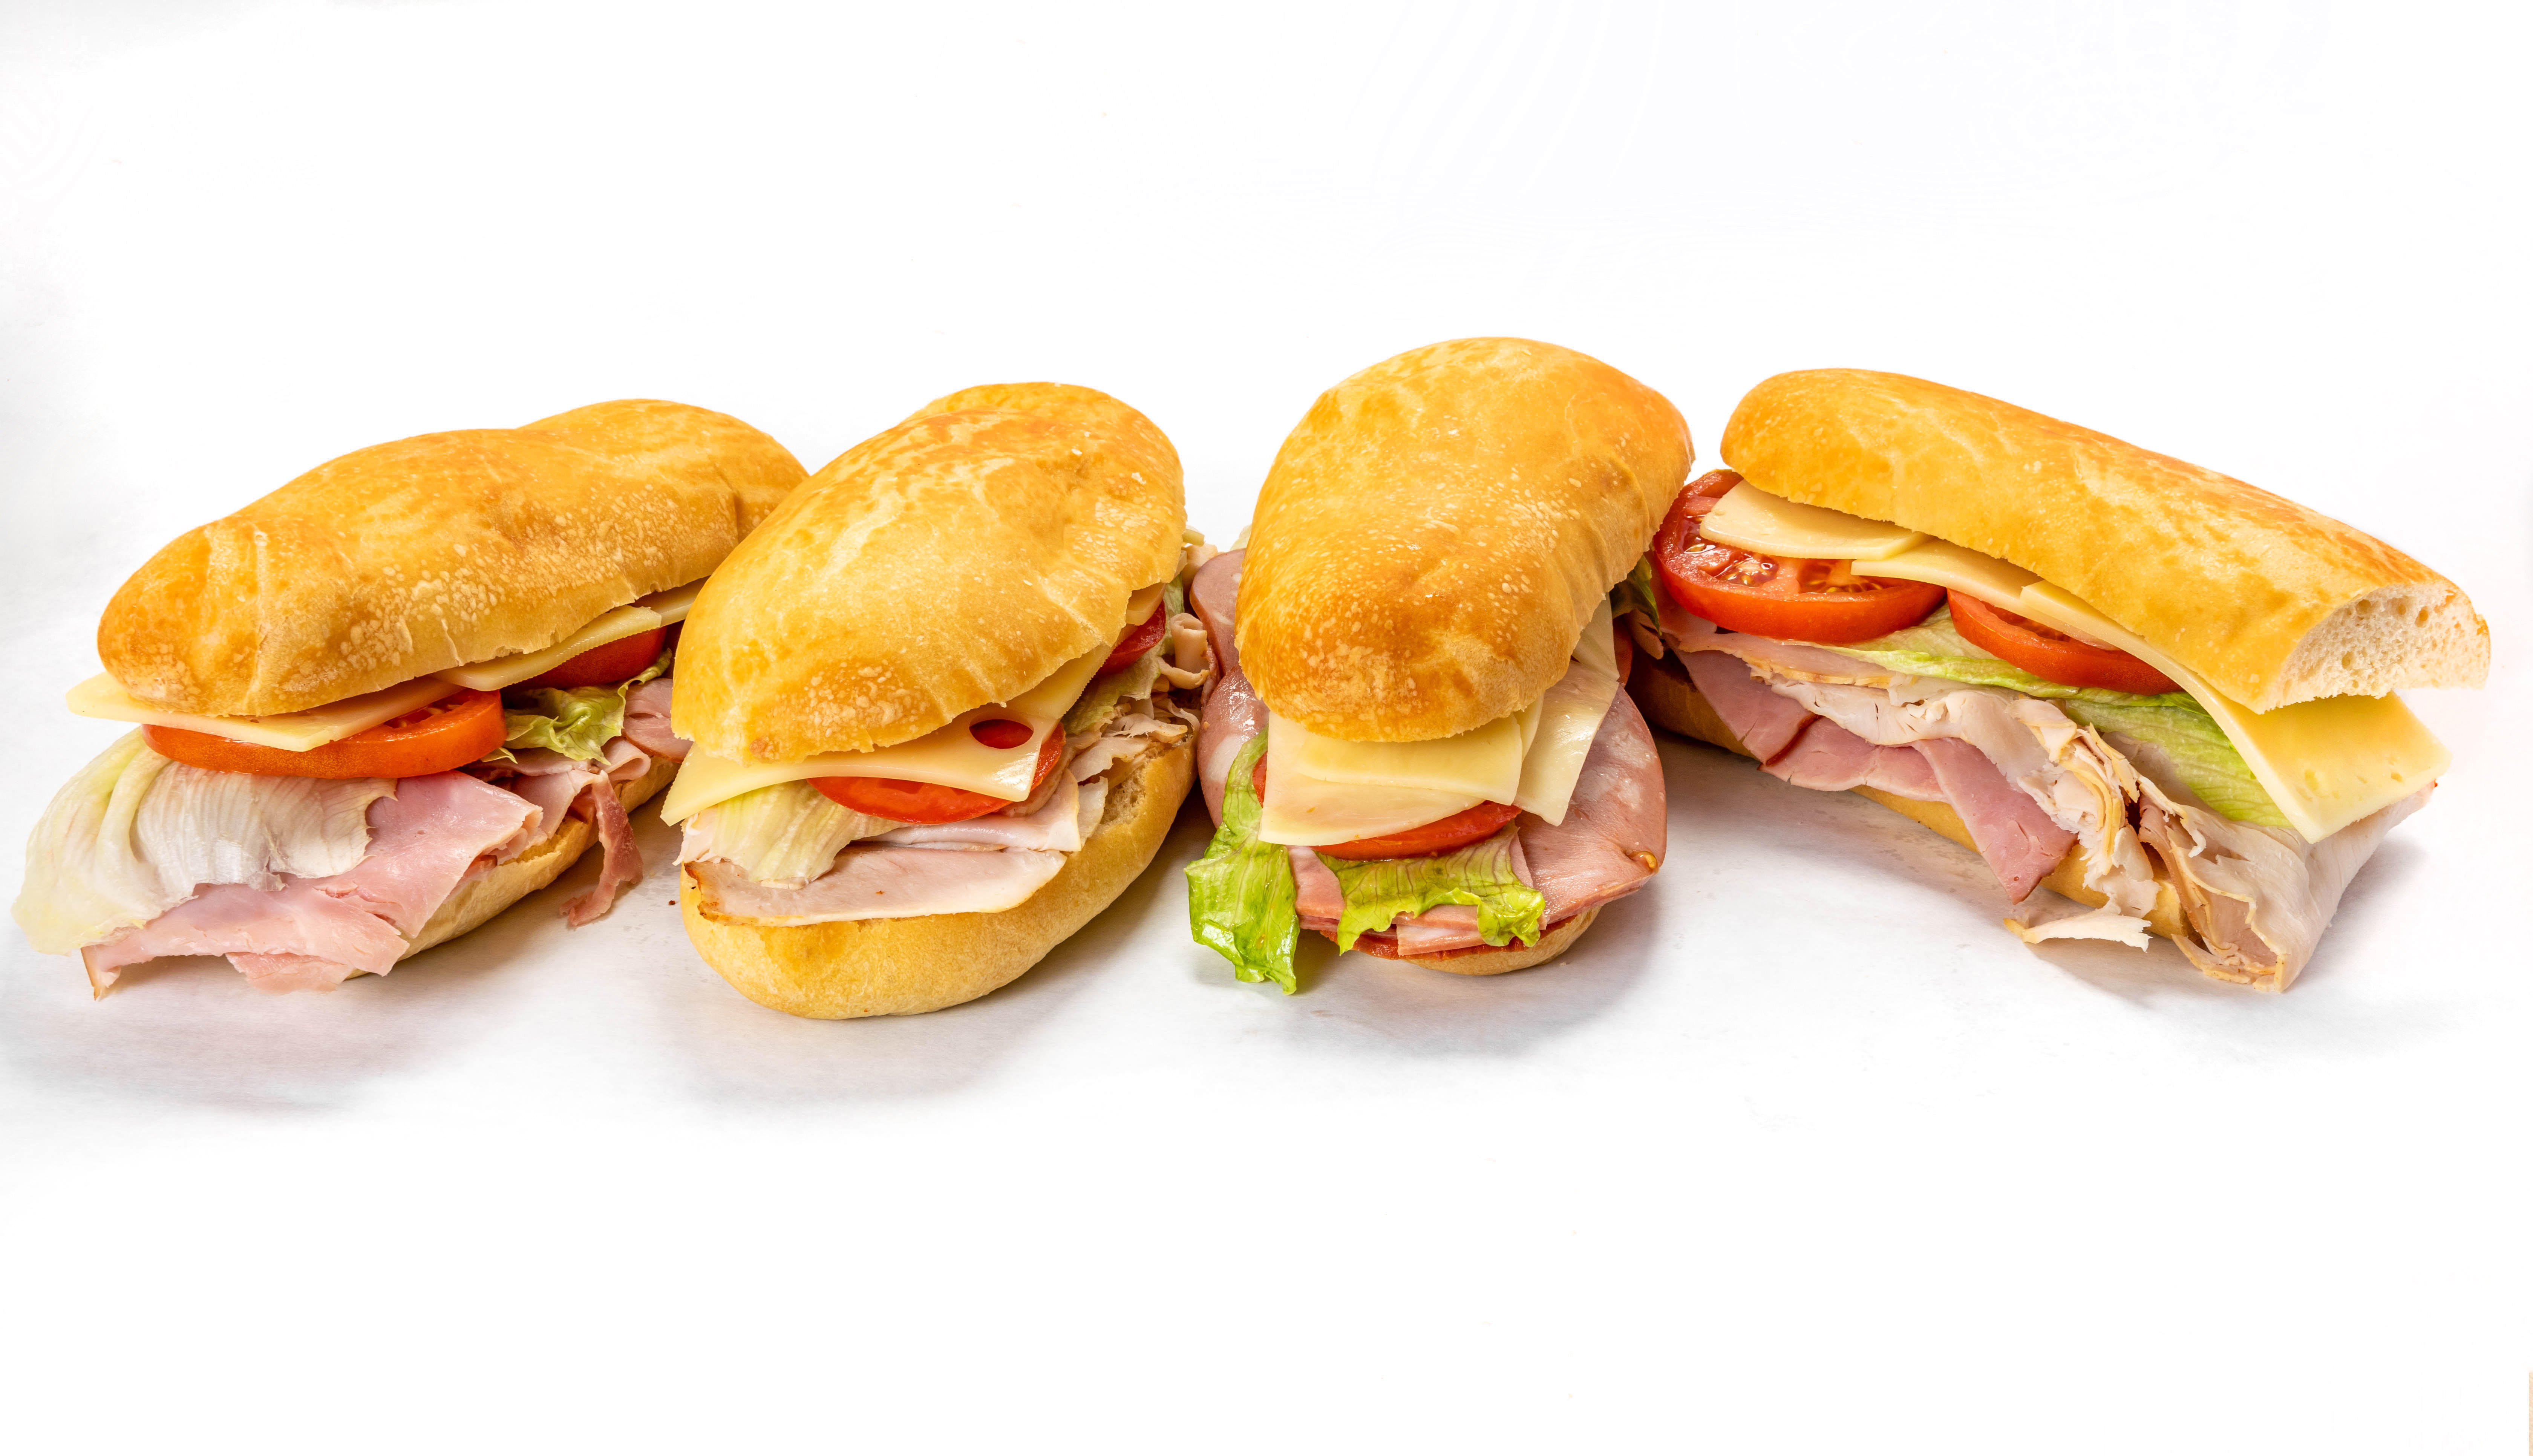 Wide selection of Deli Subs and Sandwiches made to order!